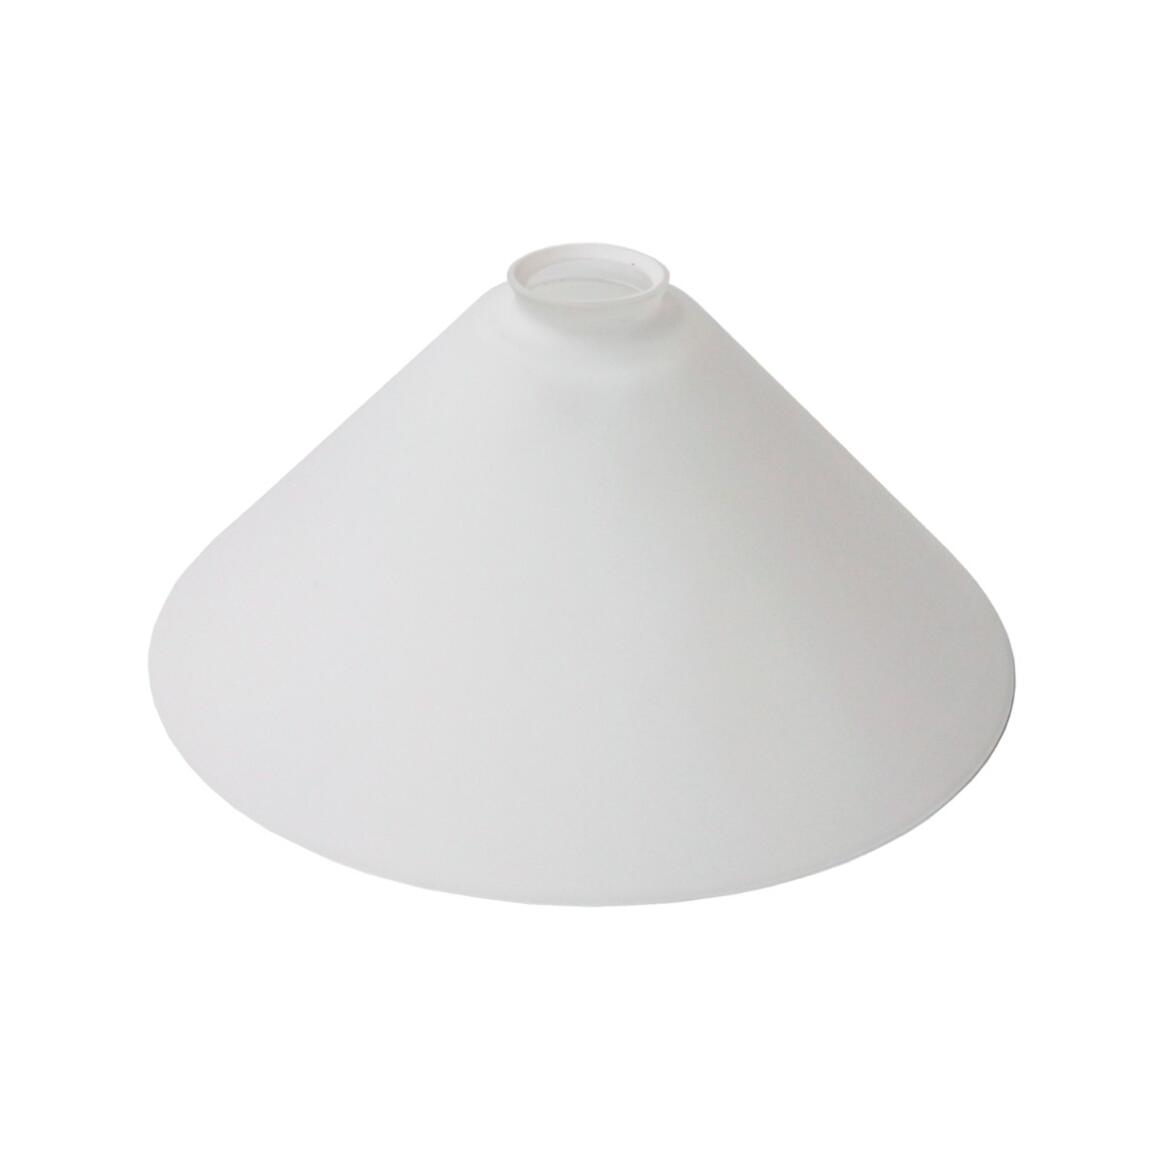 Cone pool table glass lamp shade main product image